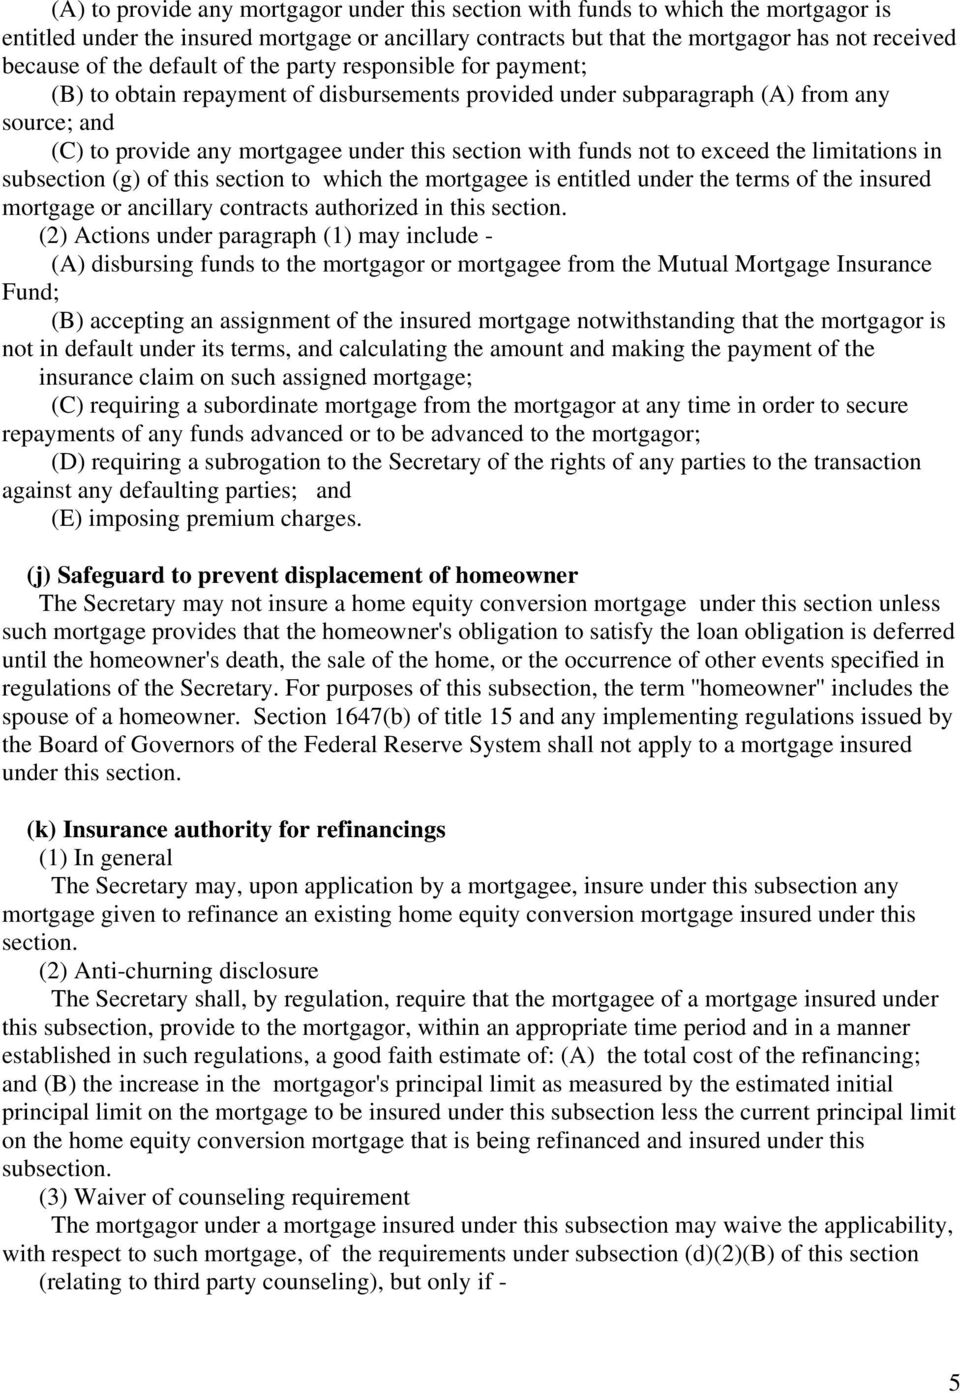 not to exceed the limitations in subsection (g) of this section to which the mortgagee is entitled under the terms of the insured mortgage or ancillary contracts authorized in this section.